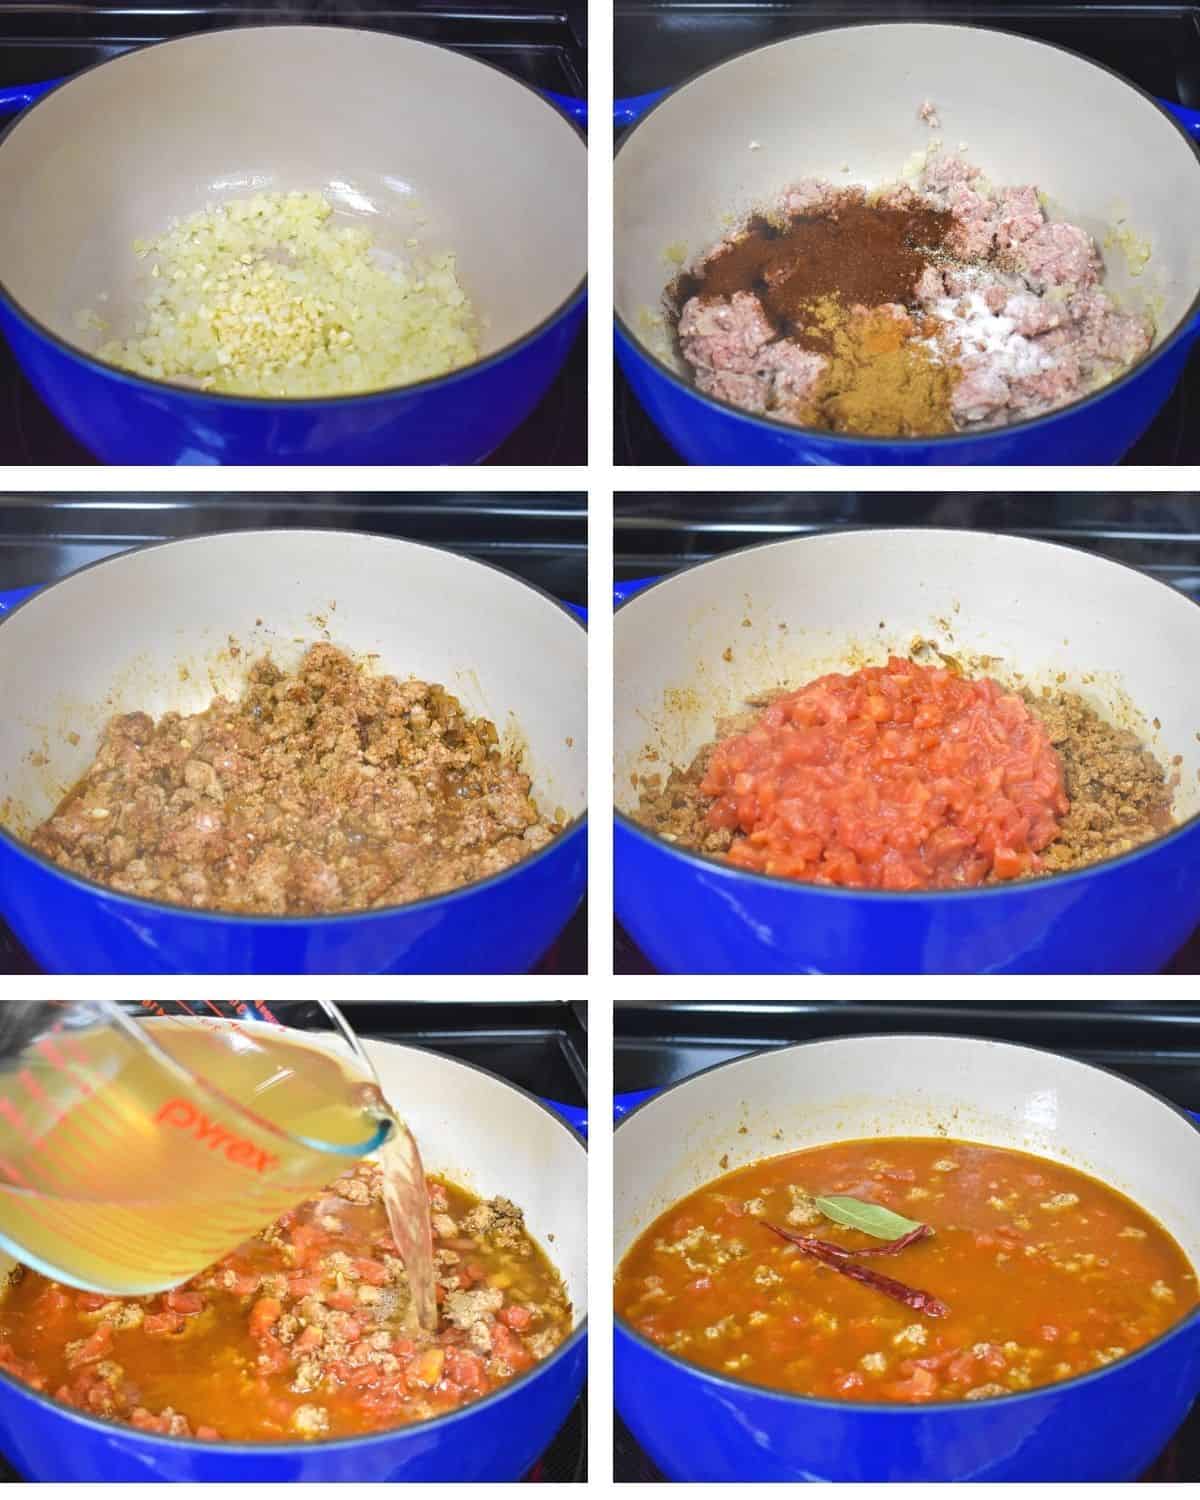 A collage of six images showing the steps of making the chili in a large blue pot.